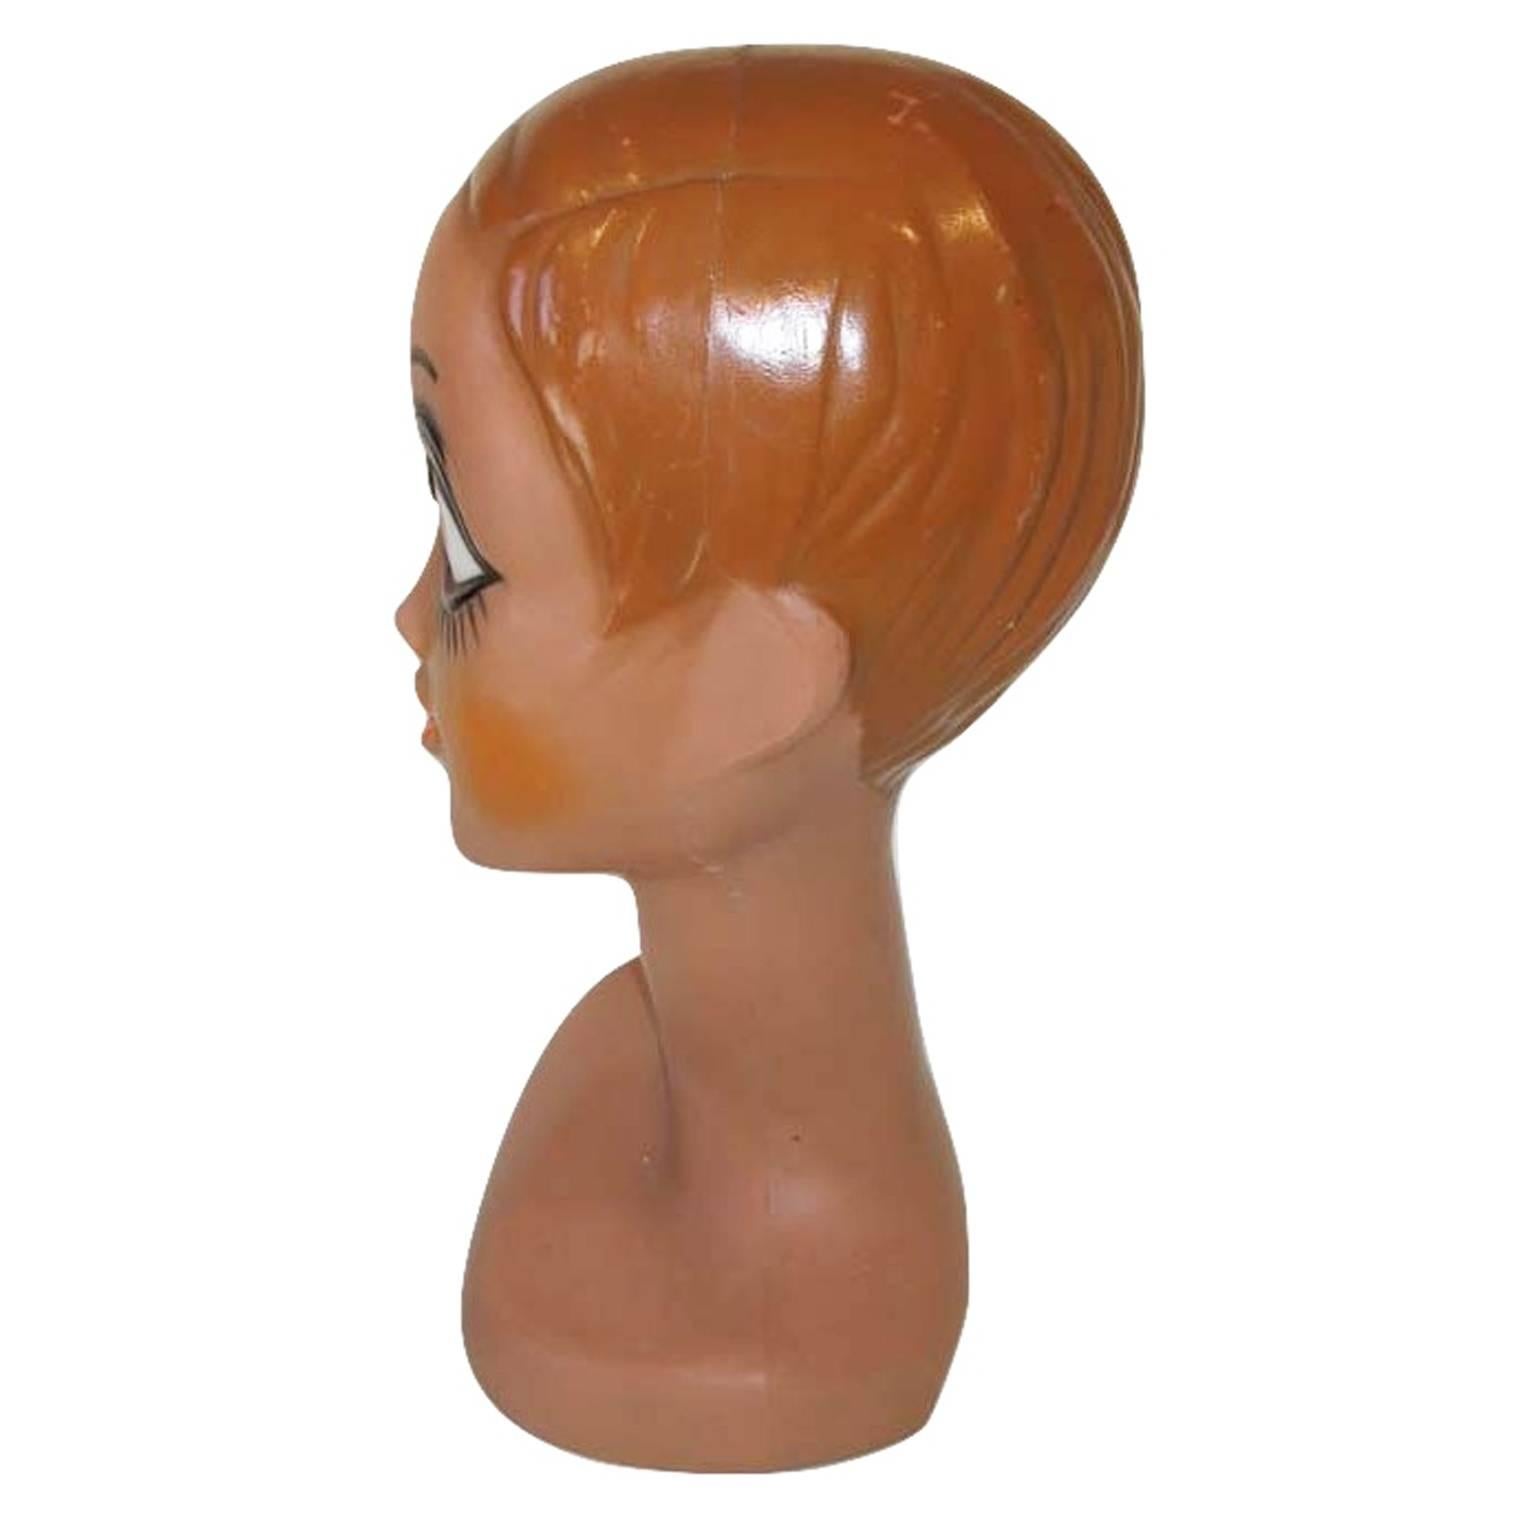 French Iconic Mannequin Twiggy Model Head by Huard, France, 1971 Space Age Design